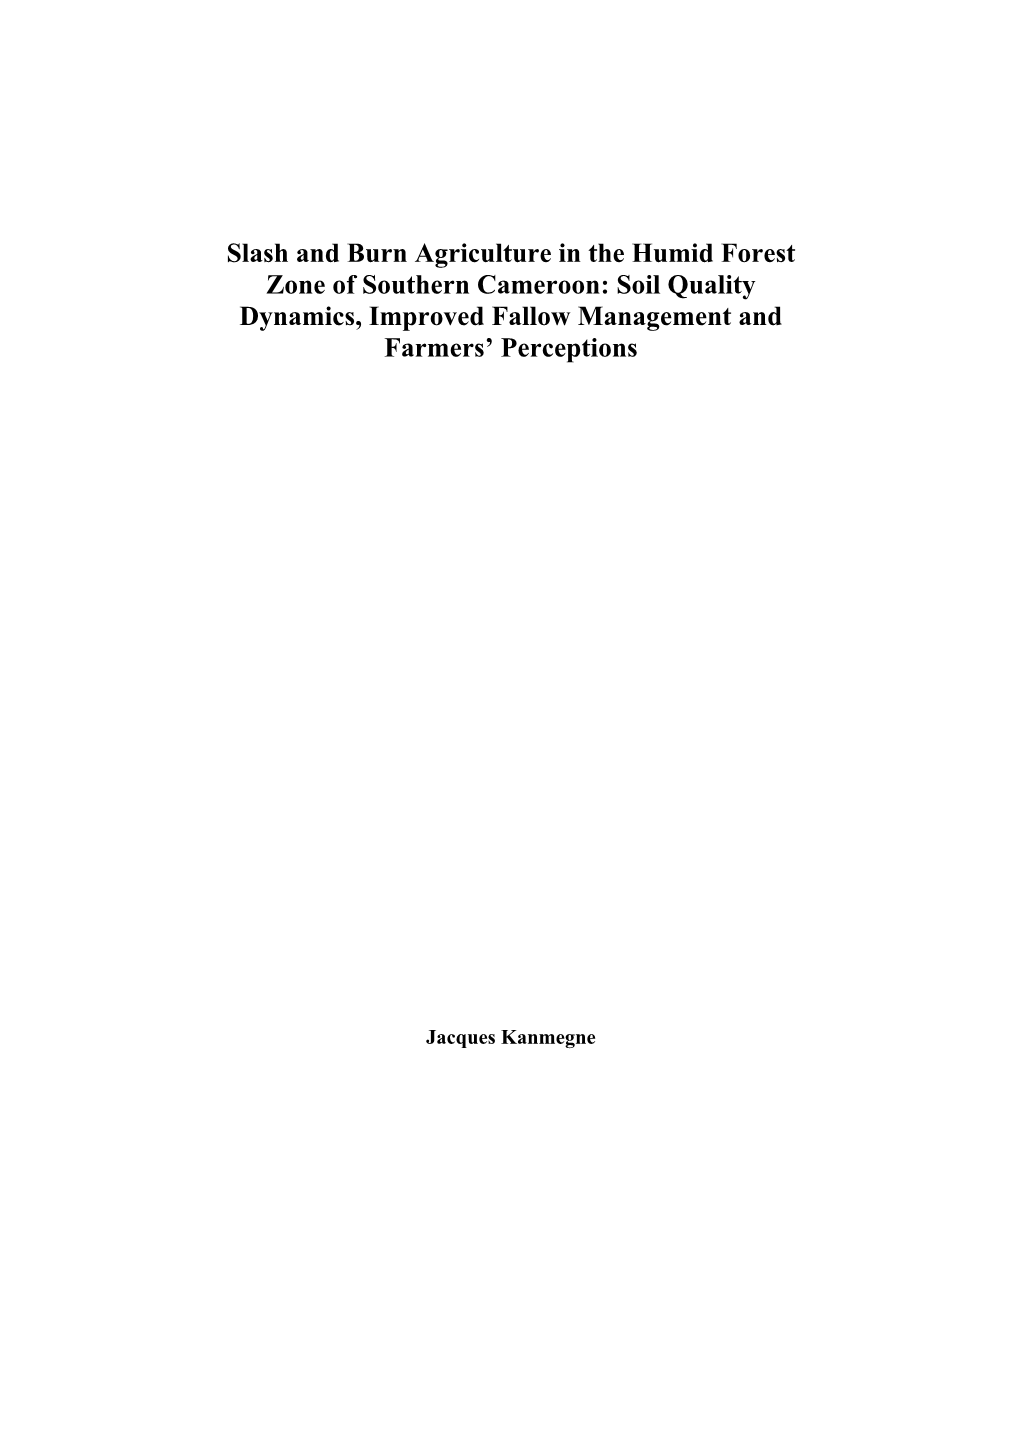 Slash and Burn Agriculture in the Humid Forest Zone of Southern Cameroon: Soil Quality Dynamics, Improved Fallow Management and Farmers’ Perceptions